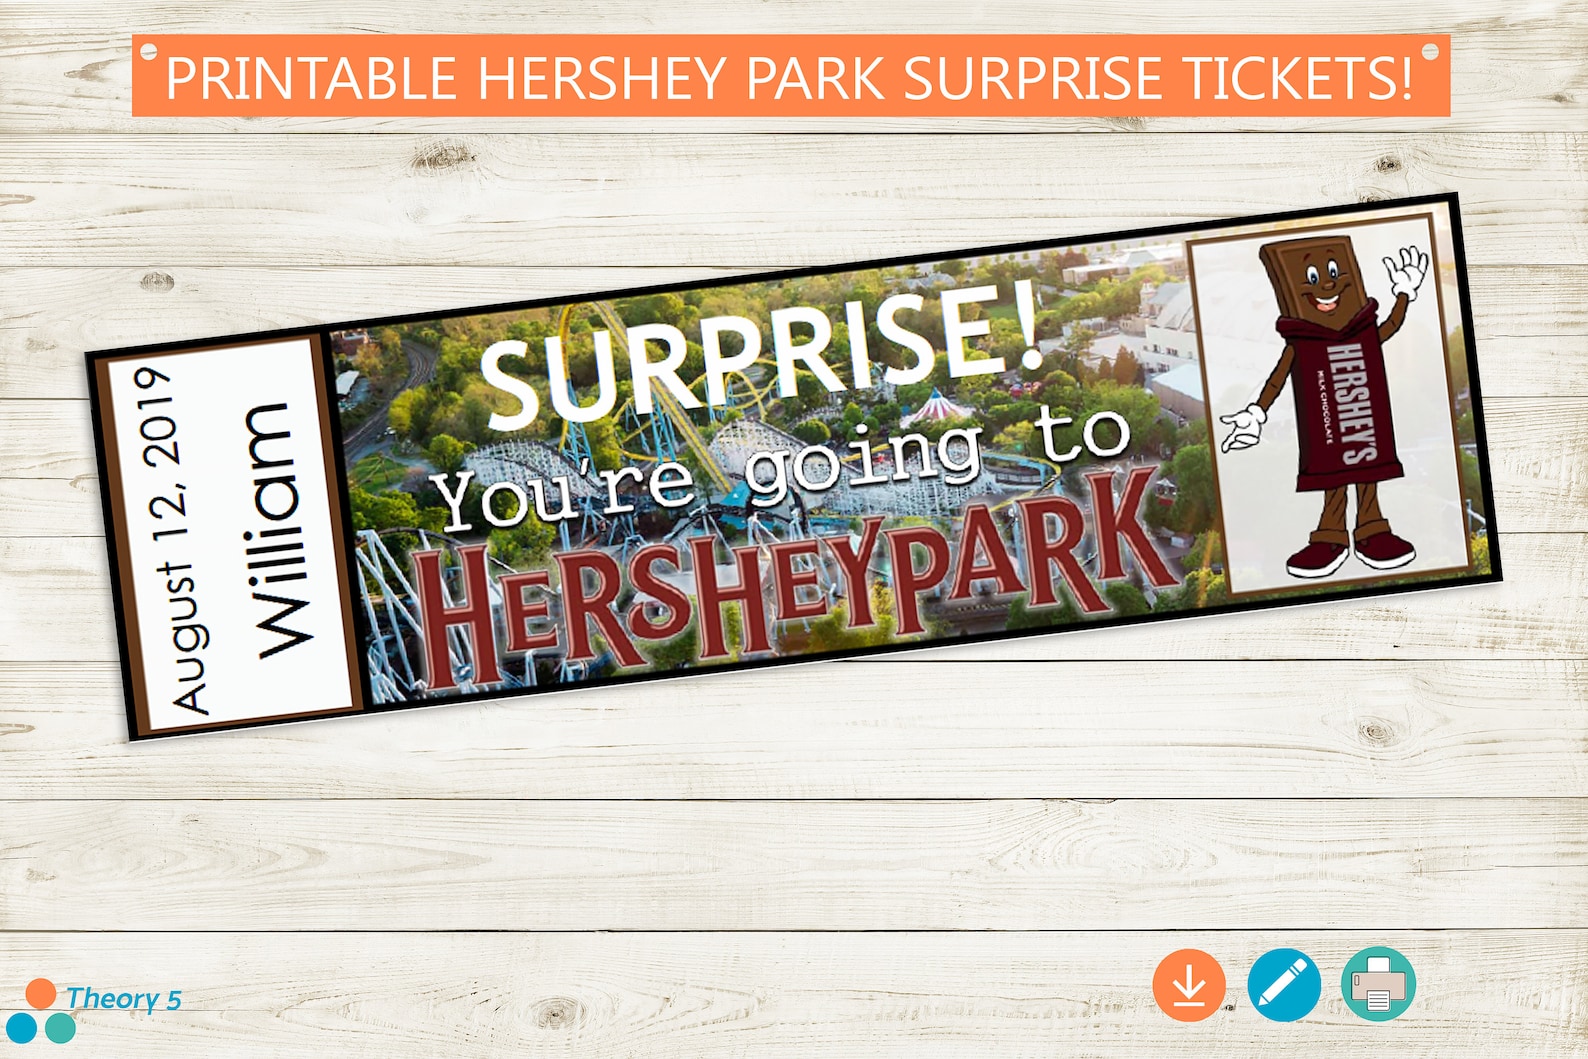 Printable and Editable Tickets to Hershey Park // Adobe Etsy